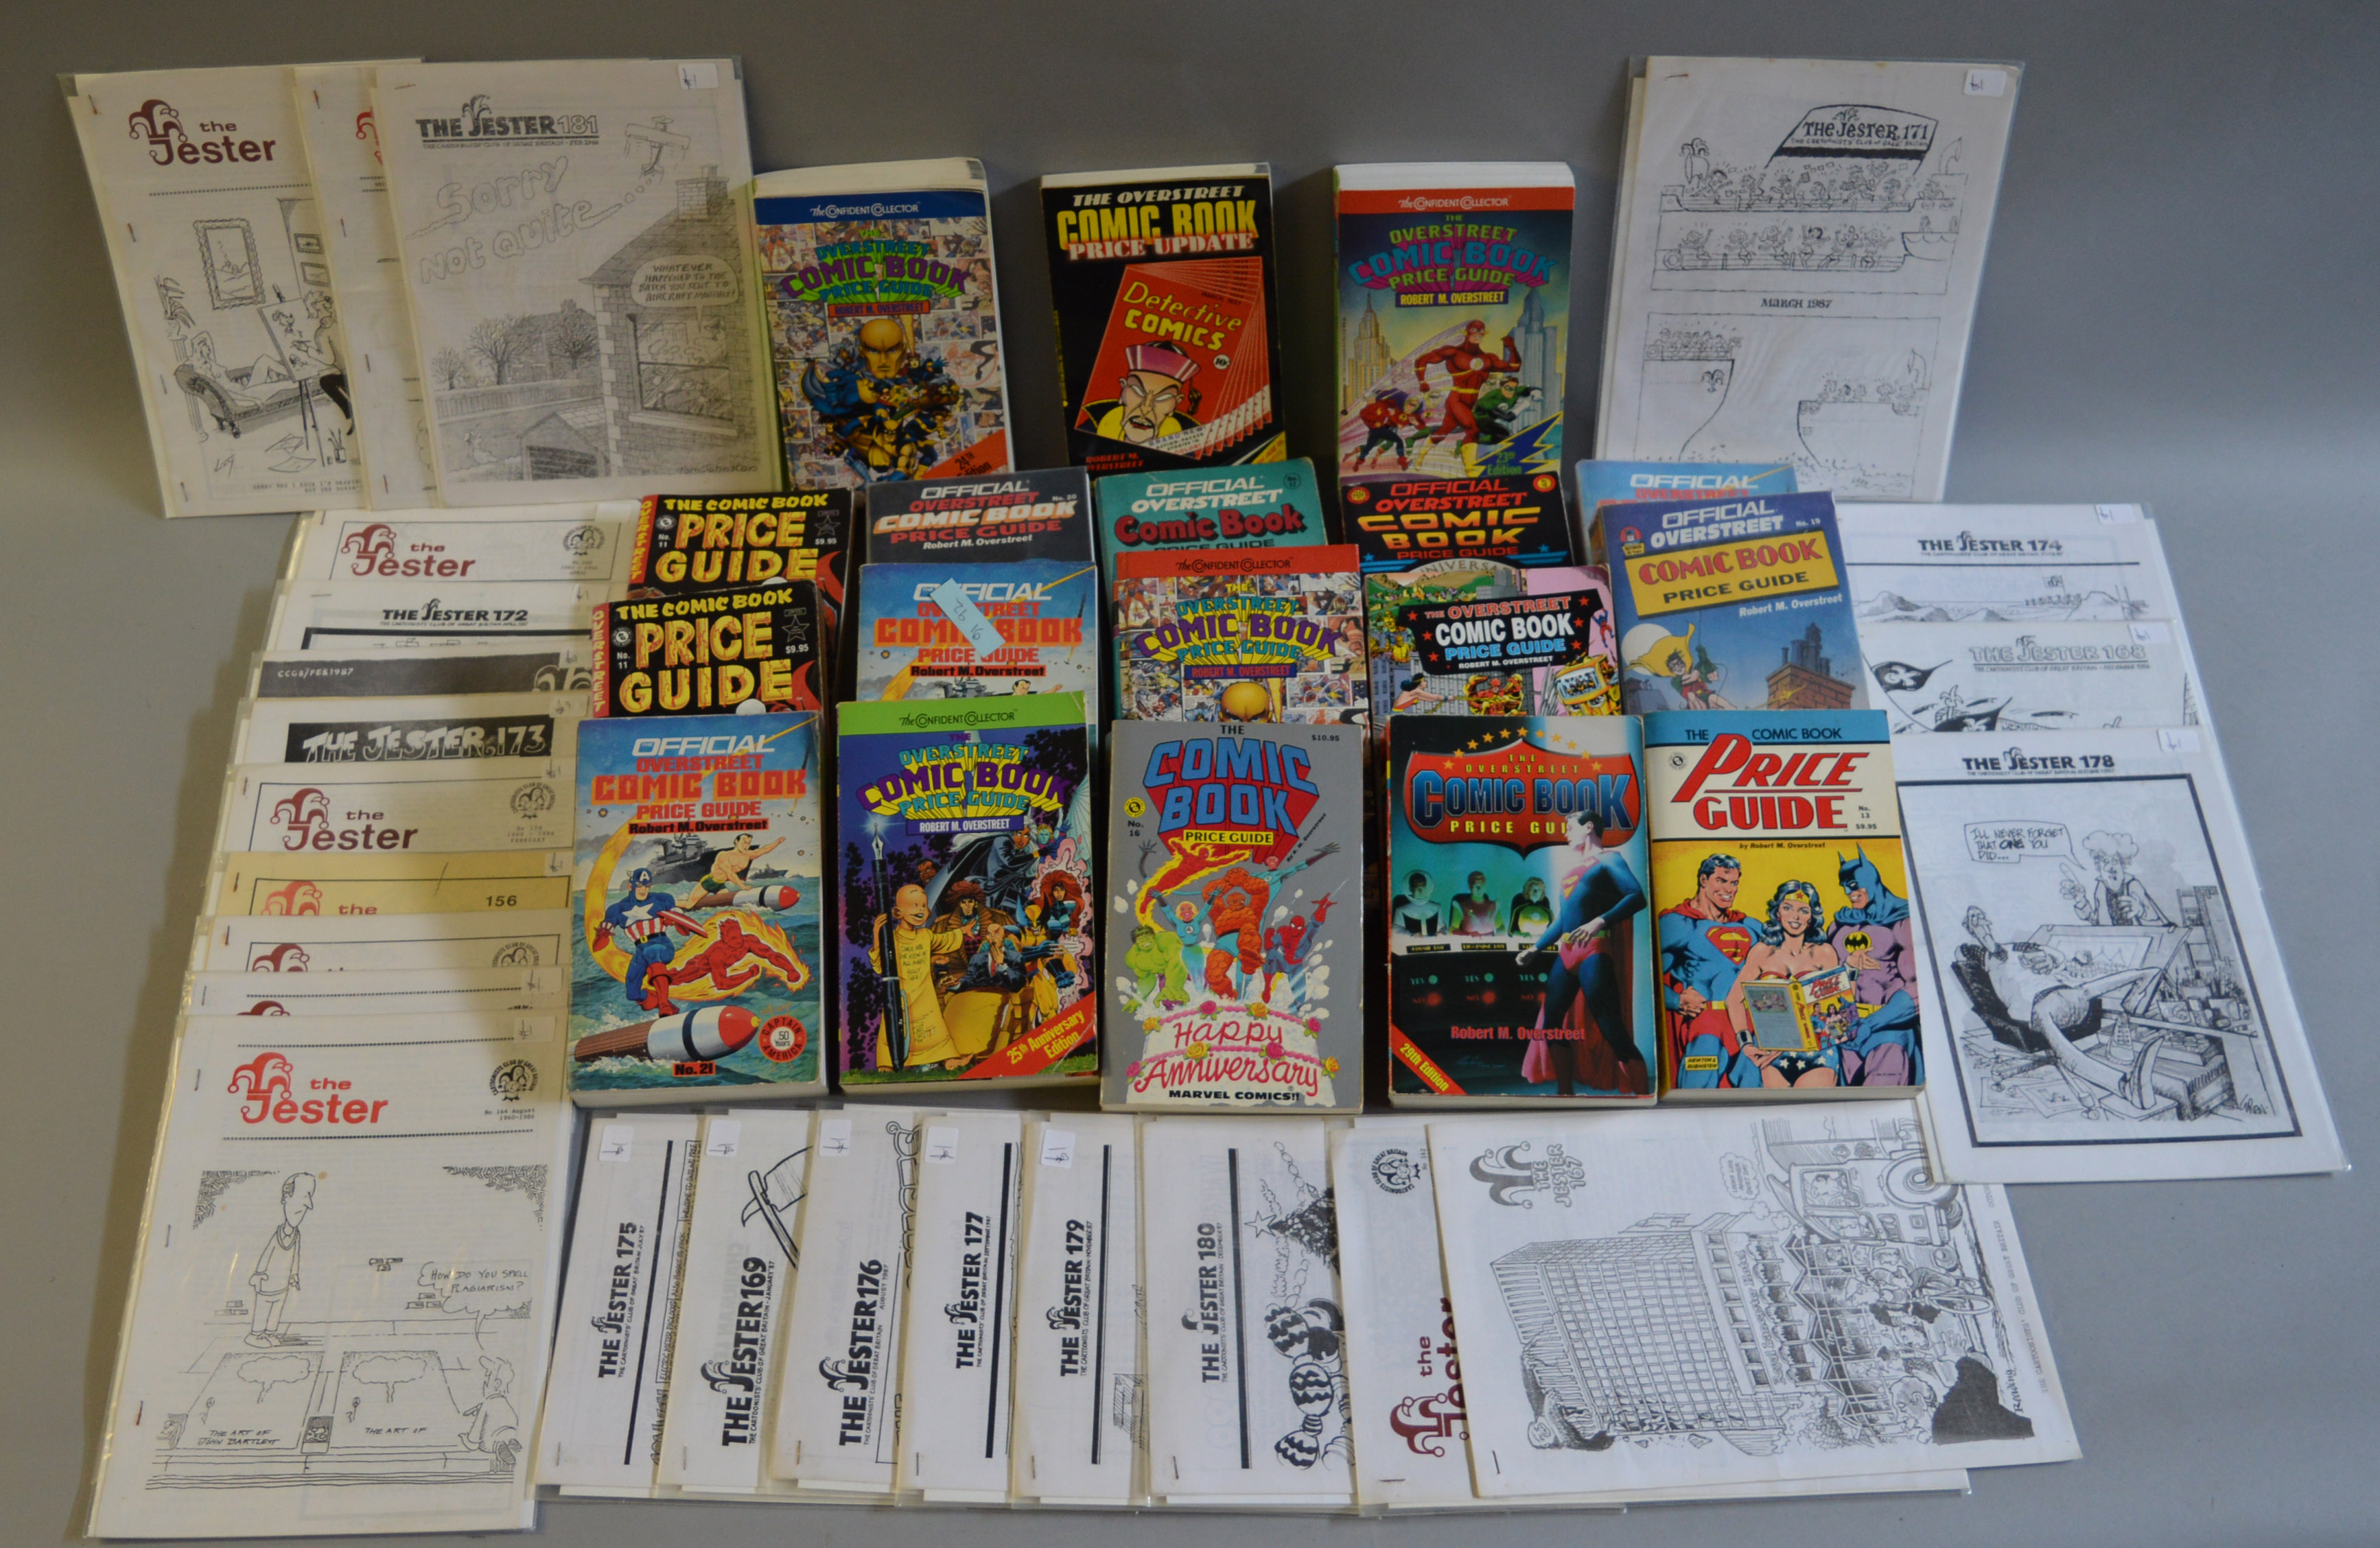 18 Comic book price guides together with some Jester comic books.